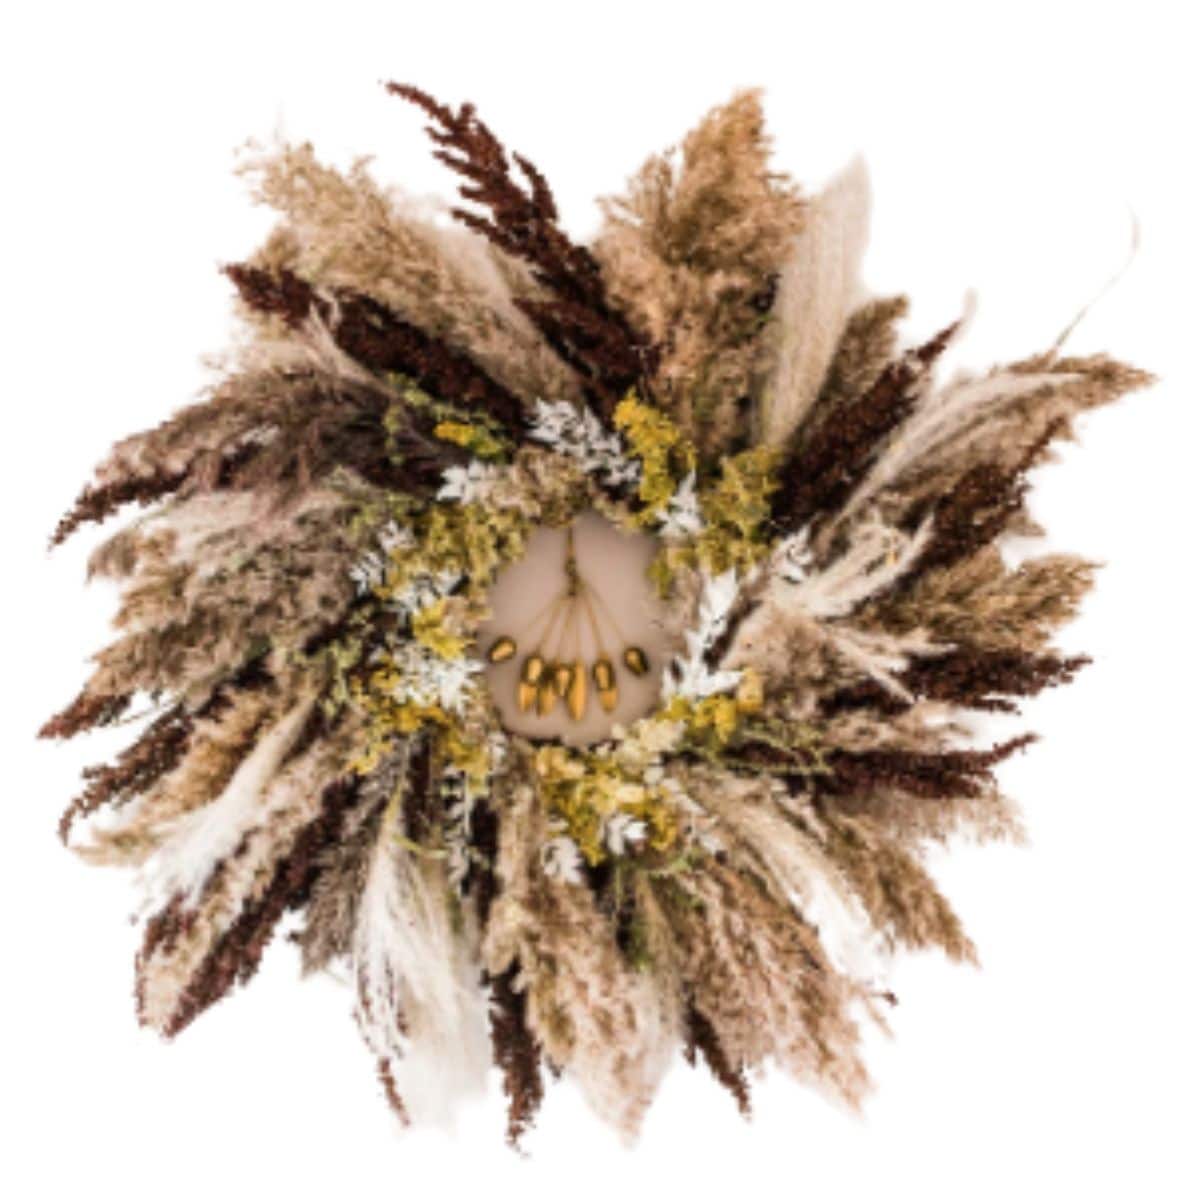 Wreath made with dried natural grasses, yellow goldenrod, and bunny tail grasses or bleached Italian ruscus from etsy.